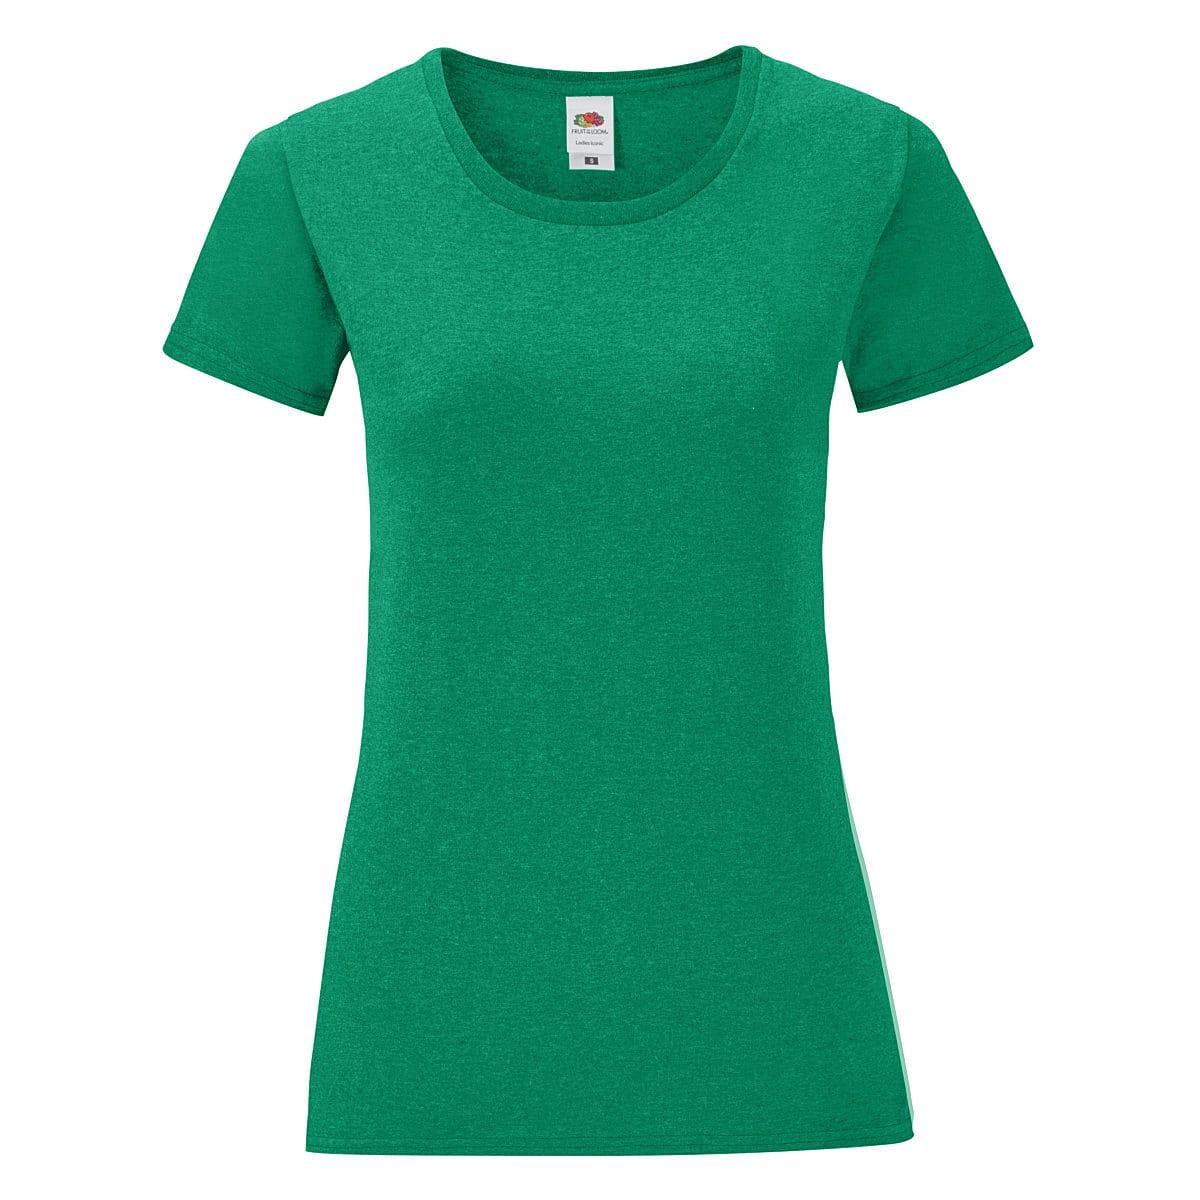 Fruit Of The Loom Womens Iconic T-Shirt in Retro Heather Green (Product Code: 61432)